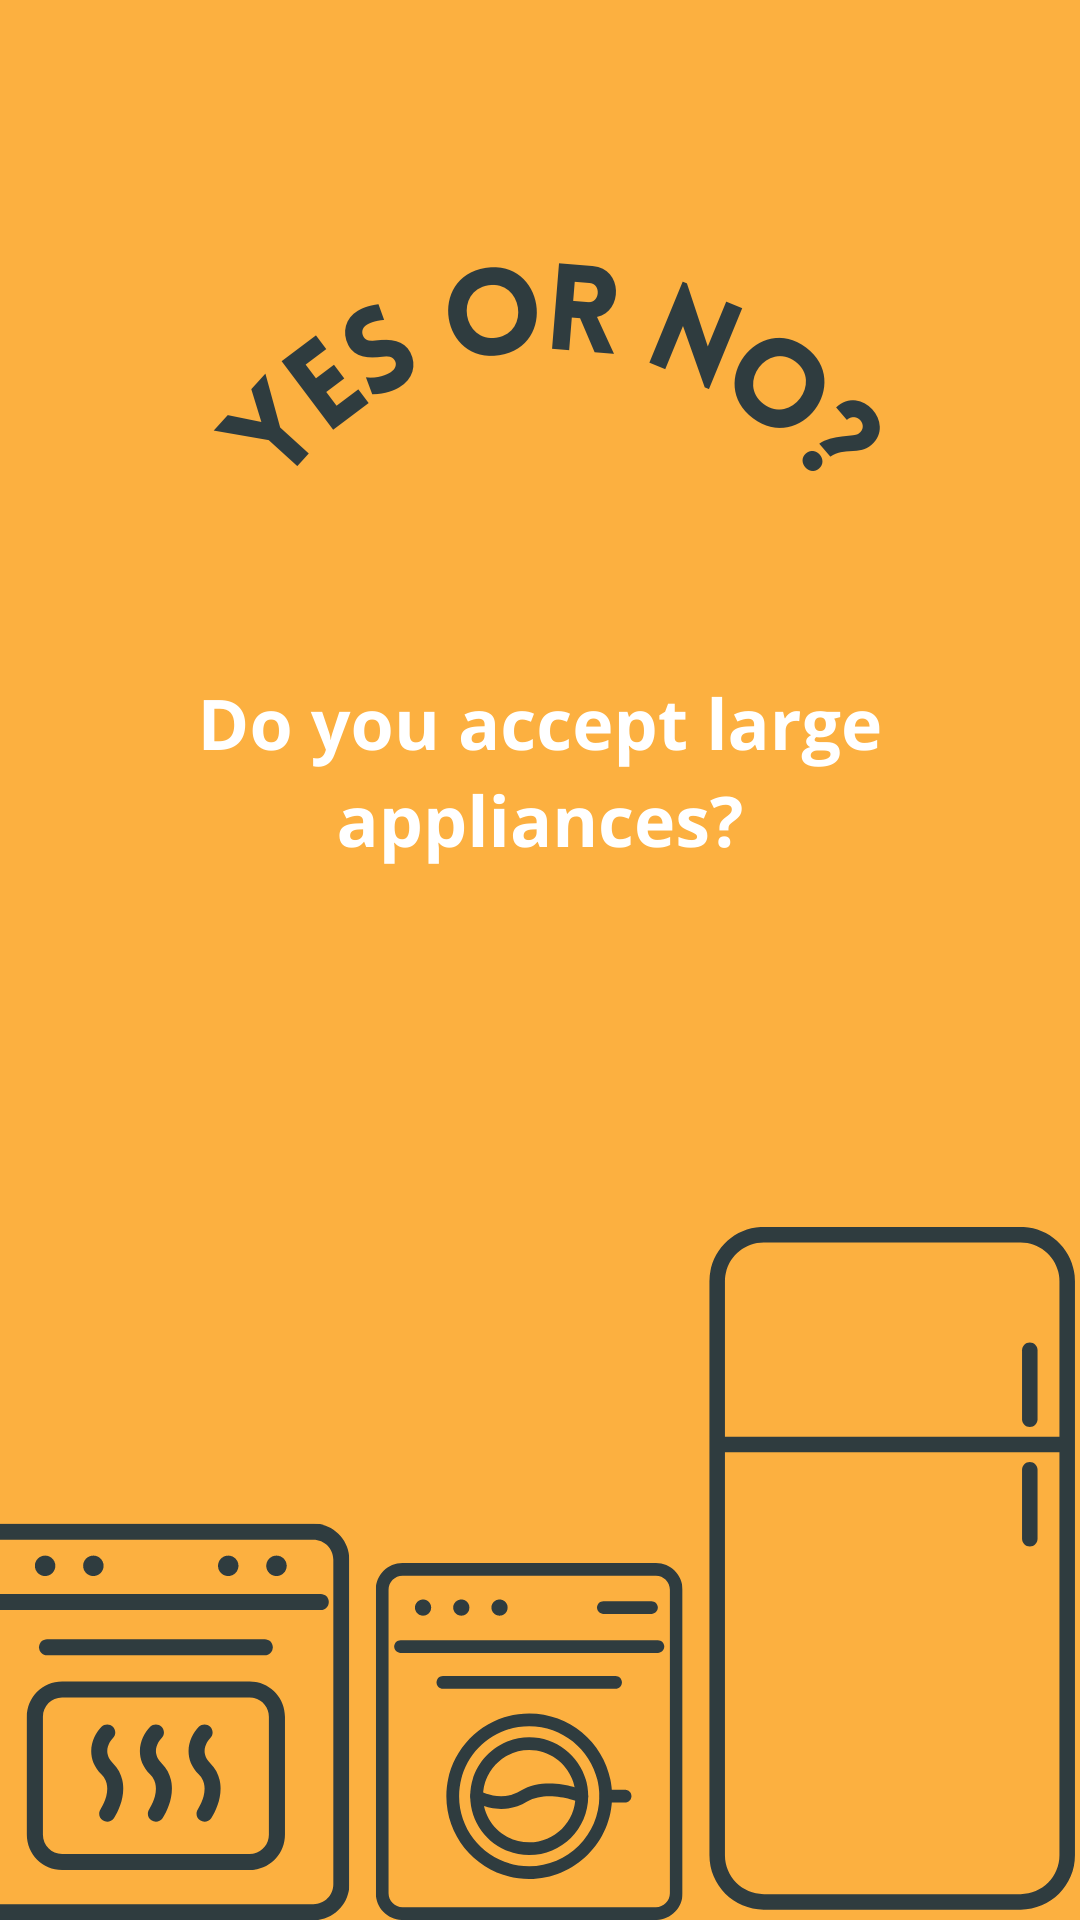 goodwill poster on donating large appliances